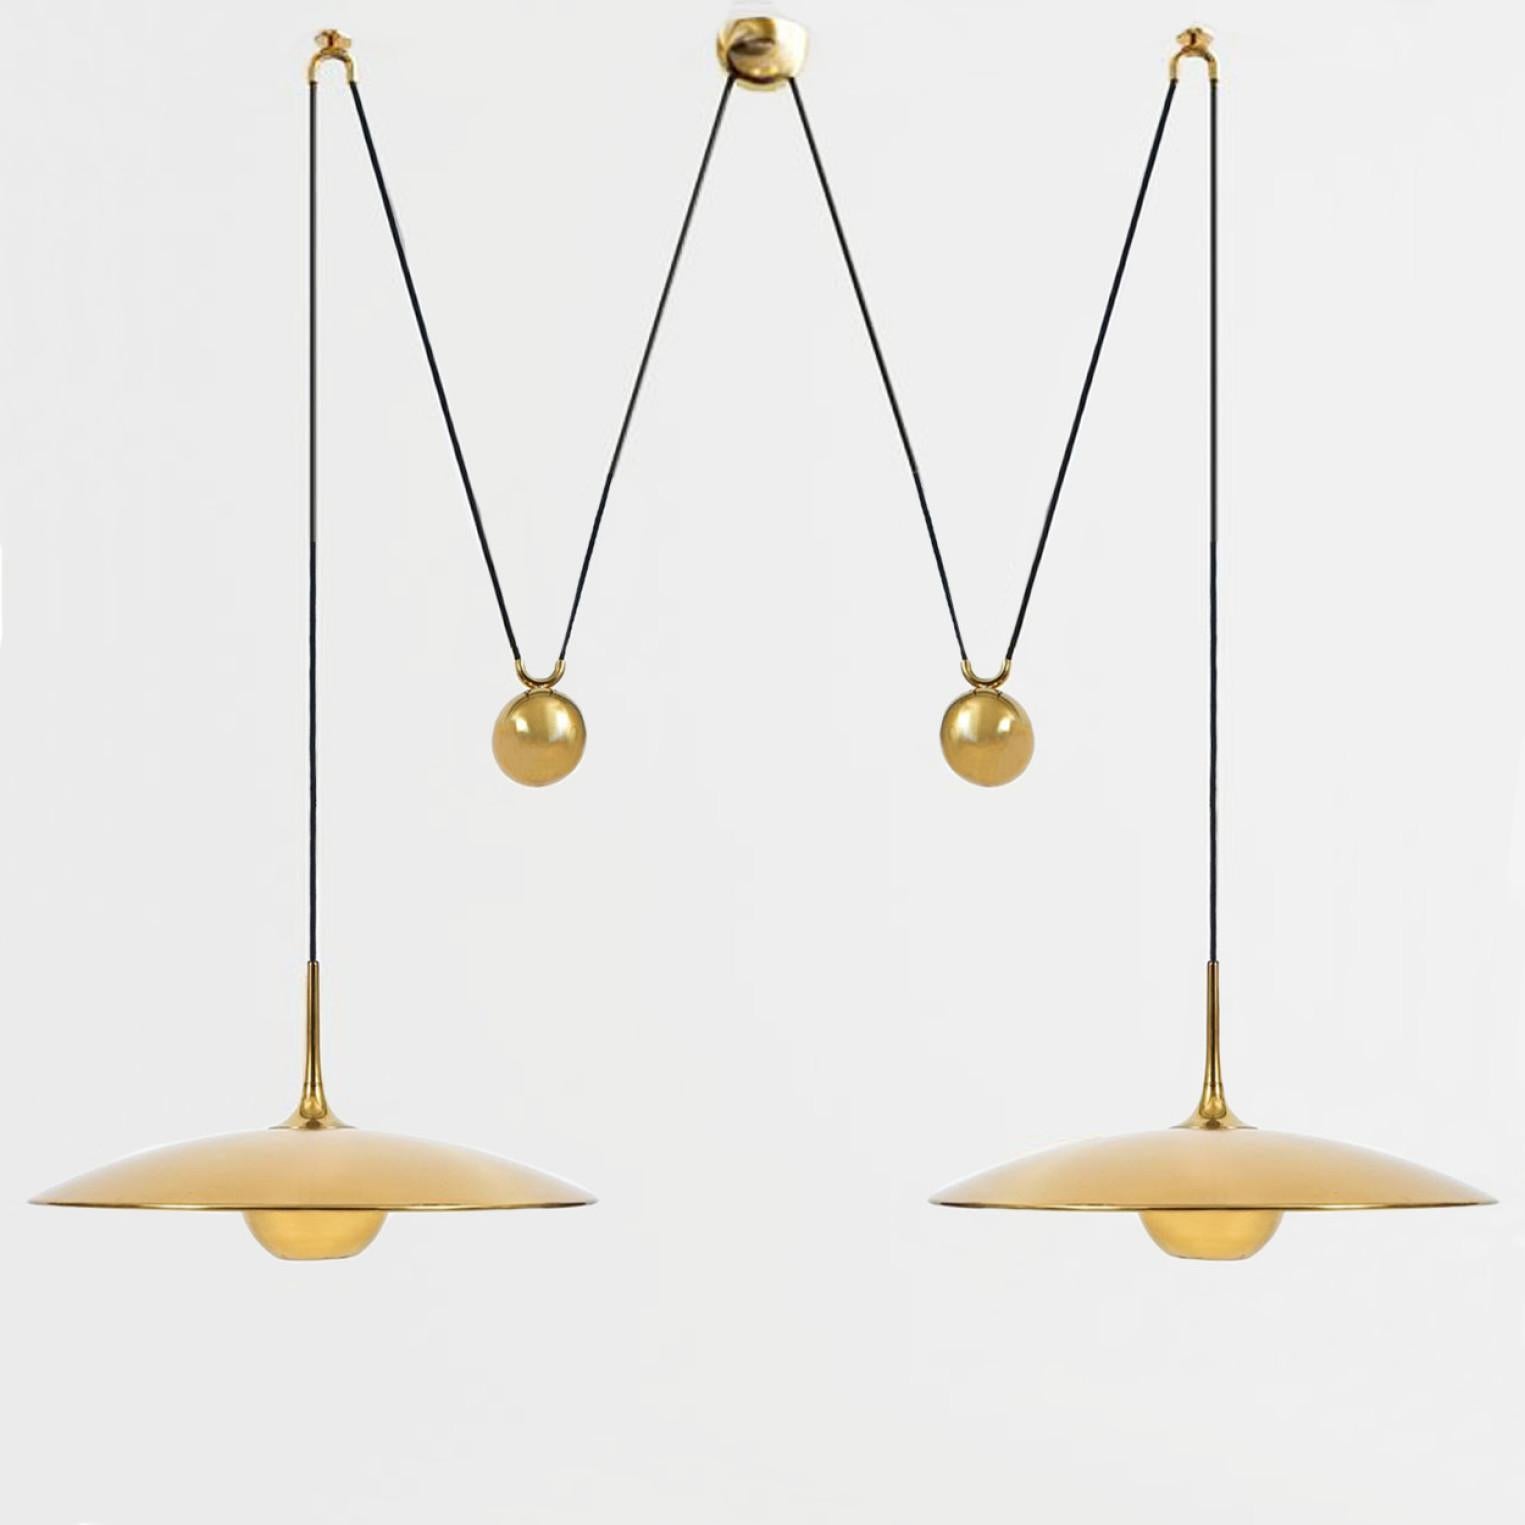 Fantastic pendant light Onos-55 Double Pull  by Florian Schulz, Germany, Europe. Design period: 1970-1979, production period: 2022.

Two brass polished unlacquered pendants suspended with their own brass ball counter balance. One canopy supports